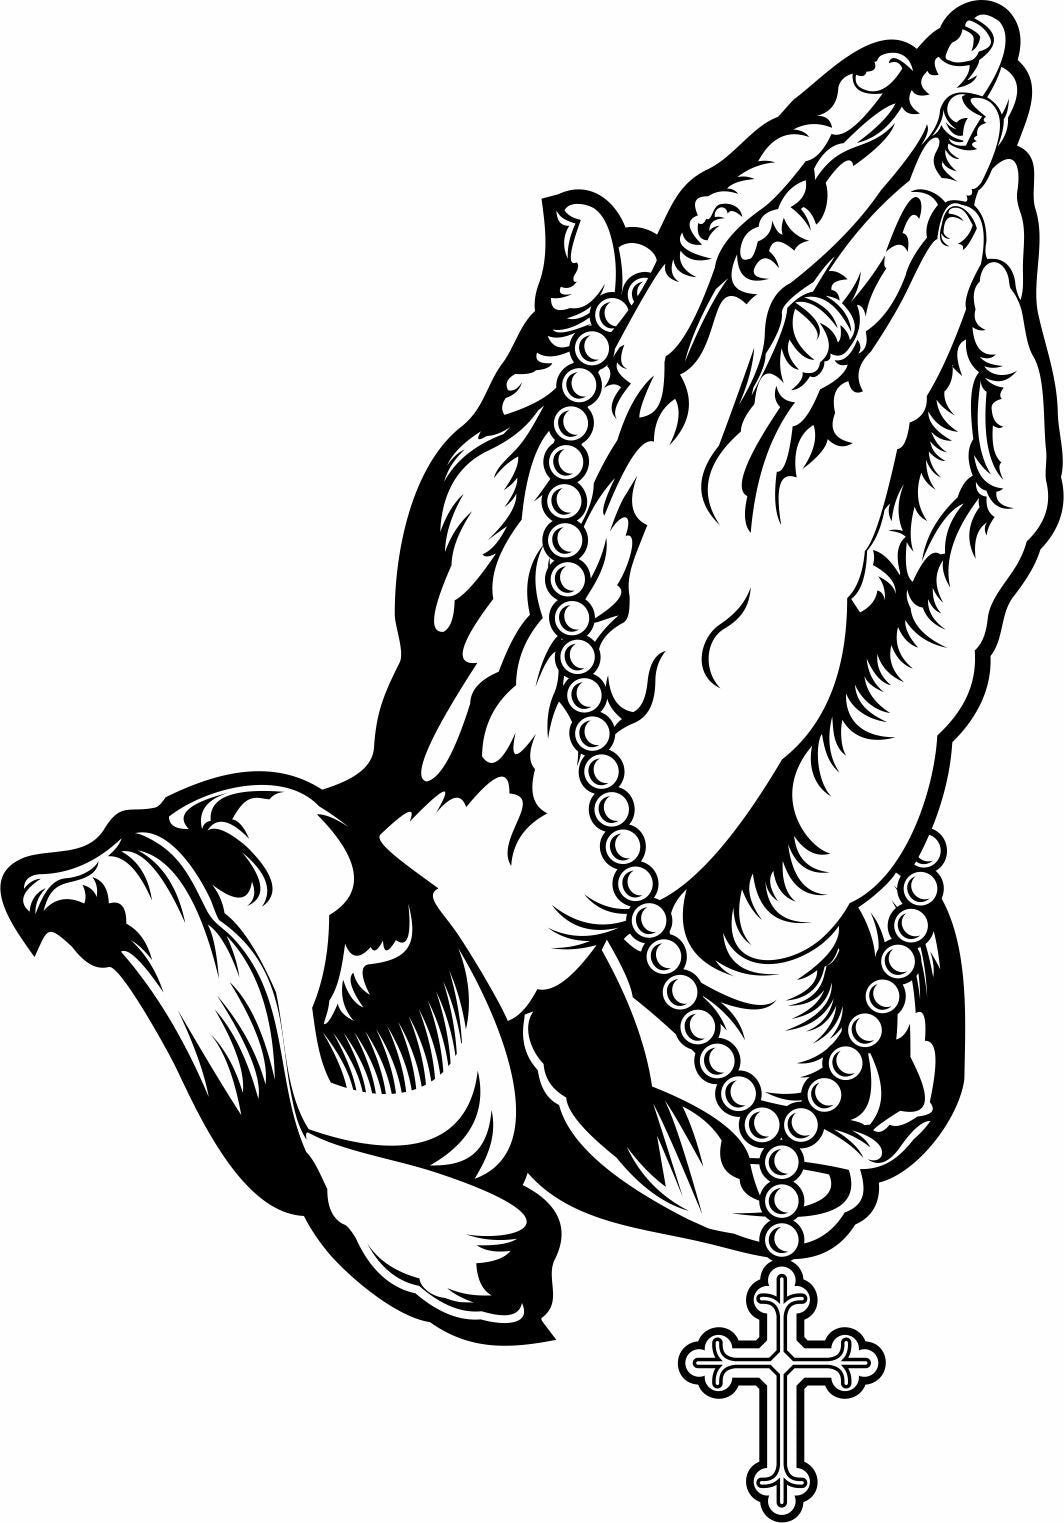 Praying Hands with Chain Decal